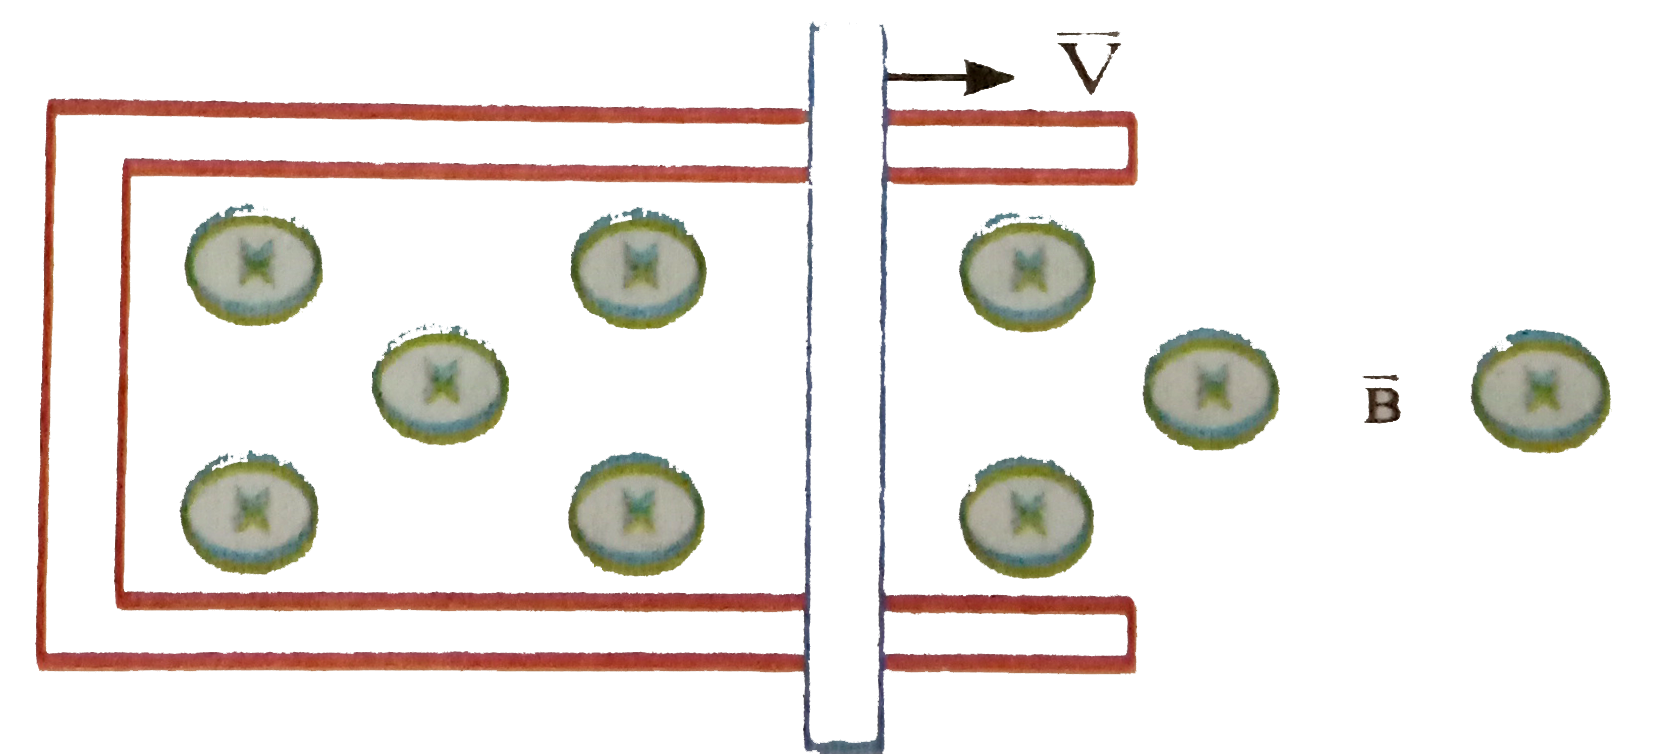 A rod lies across frictionless rails in a uniform magnetic field vec(B) as shown in figure. The rod moves to the right with speed V. In order to make the induced emf in the circuit to be zero, the magnitude of the magnetic field should